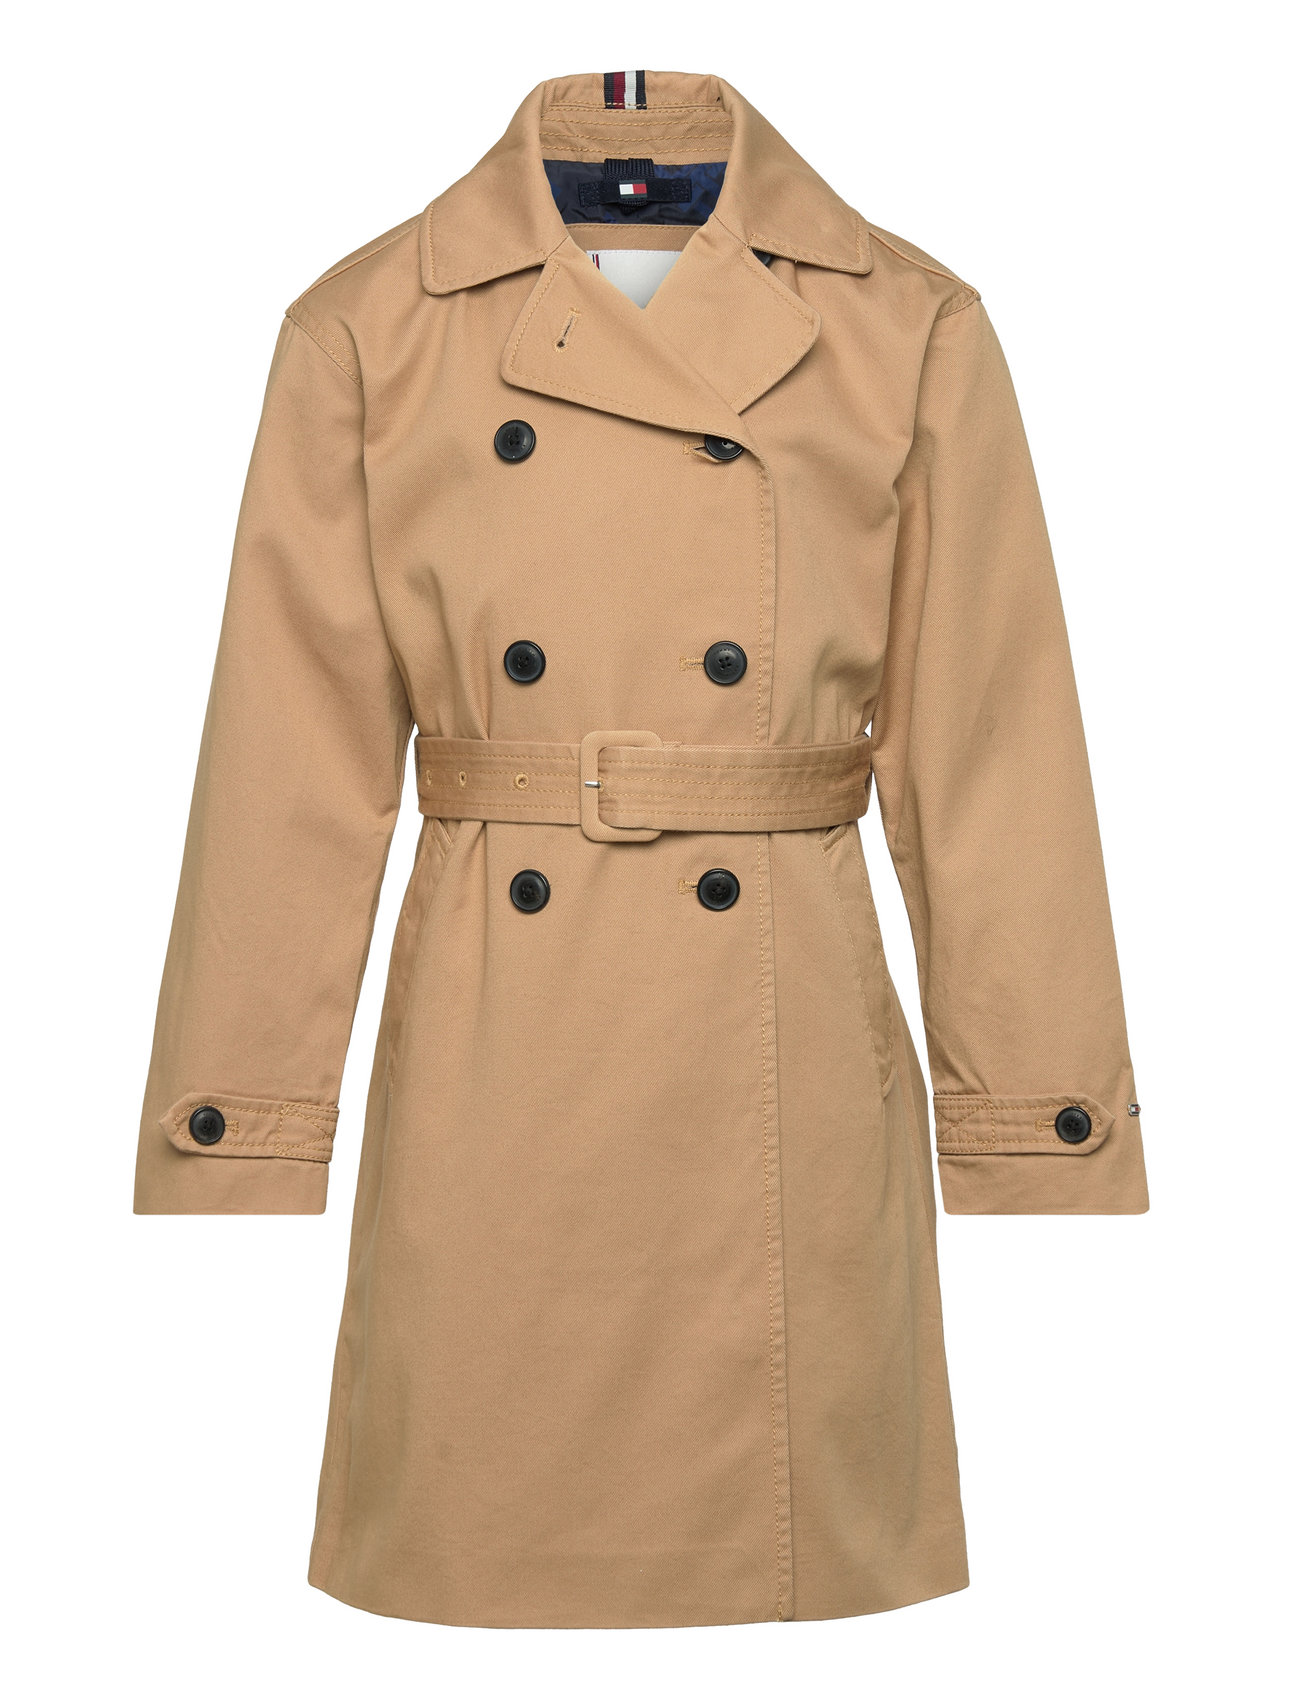 Tommy Hilfiger Monogram Trench Coat - 189.90 €. Buy Jackets from Tommy Hilfiger online at Boozt.com. Fast delivery and easy returns